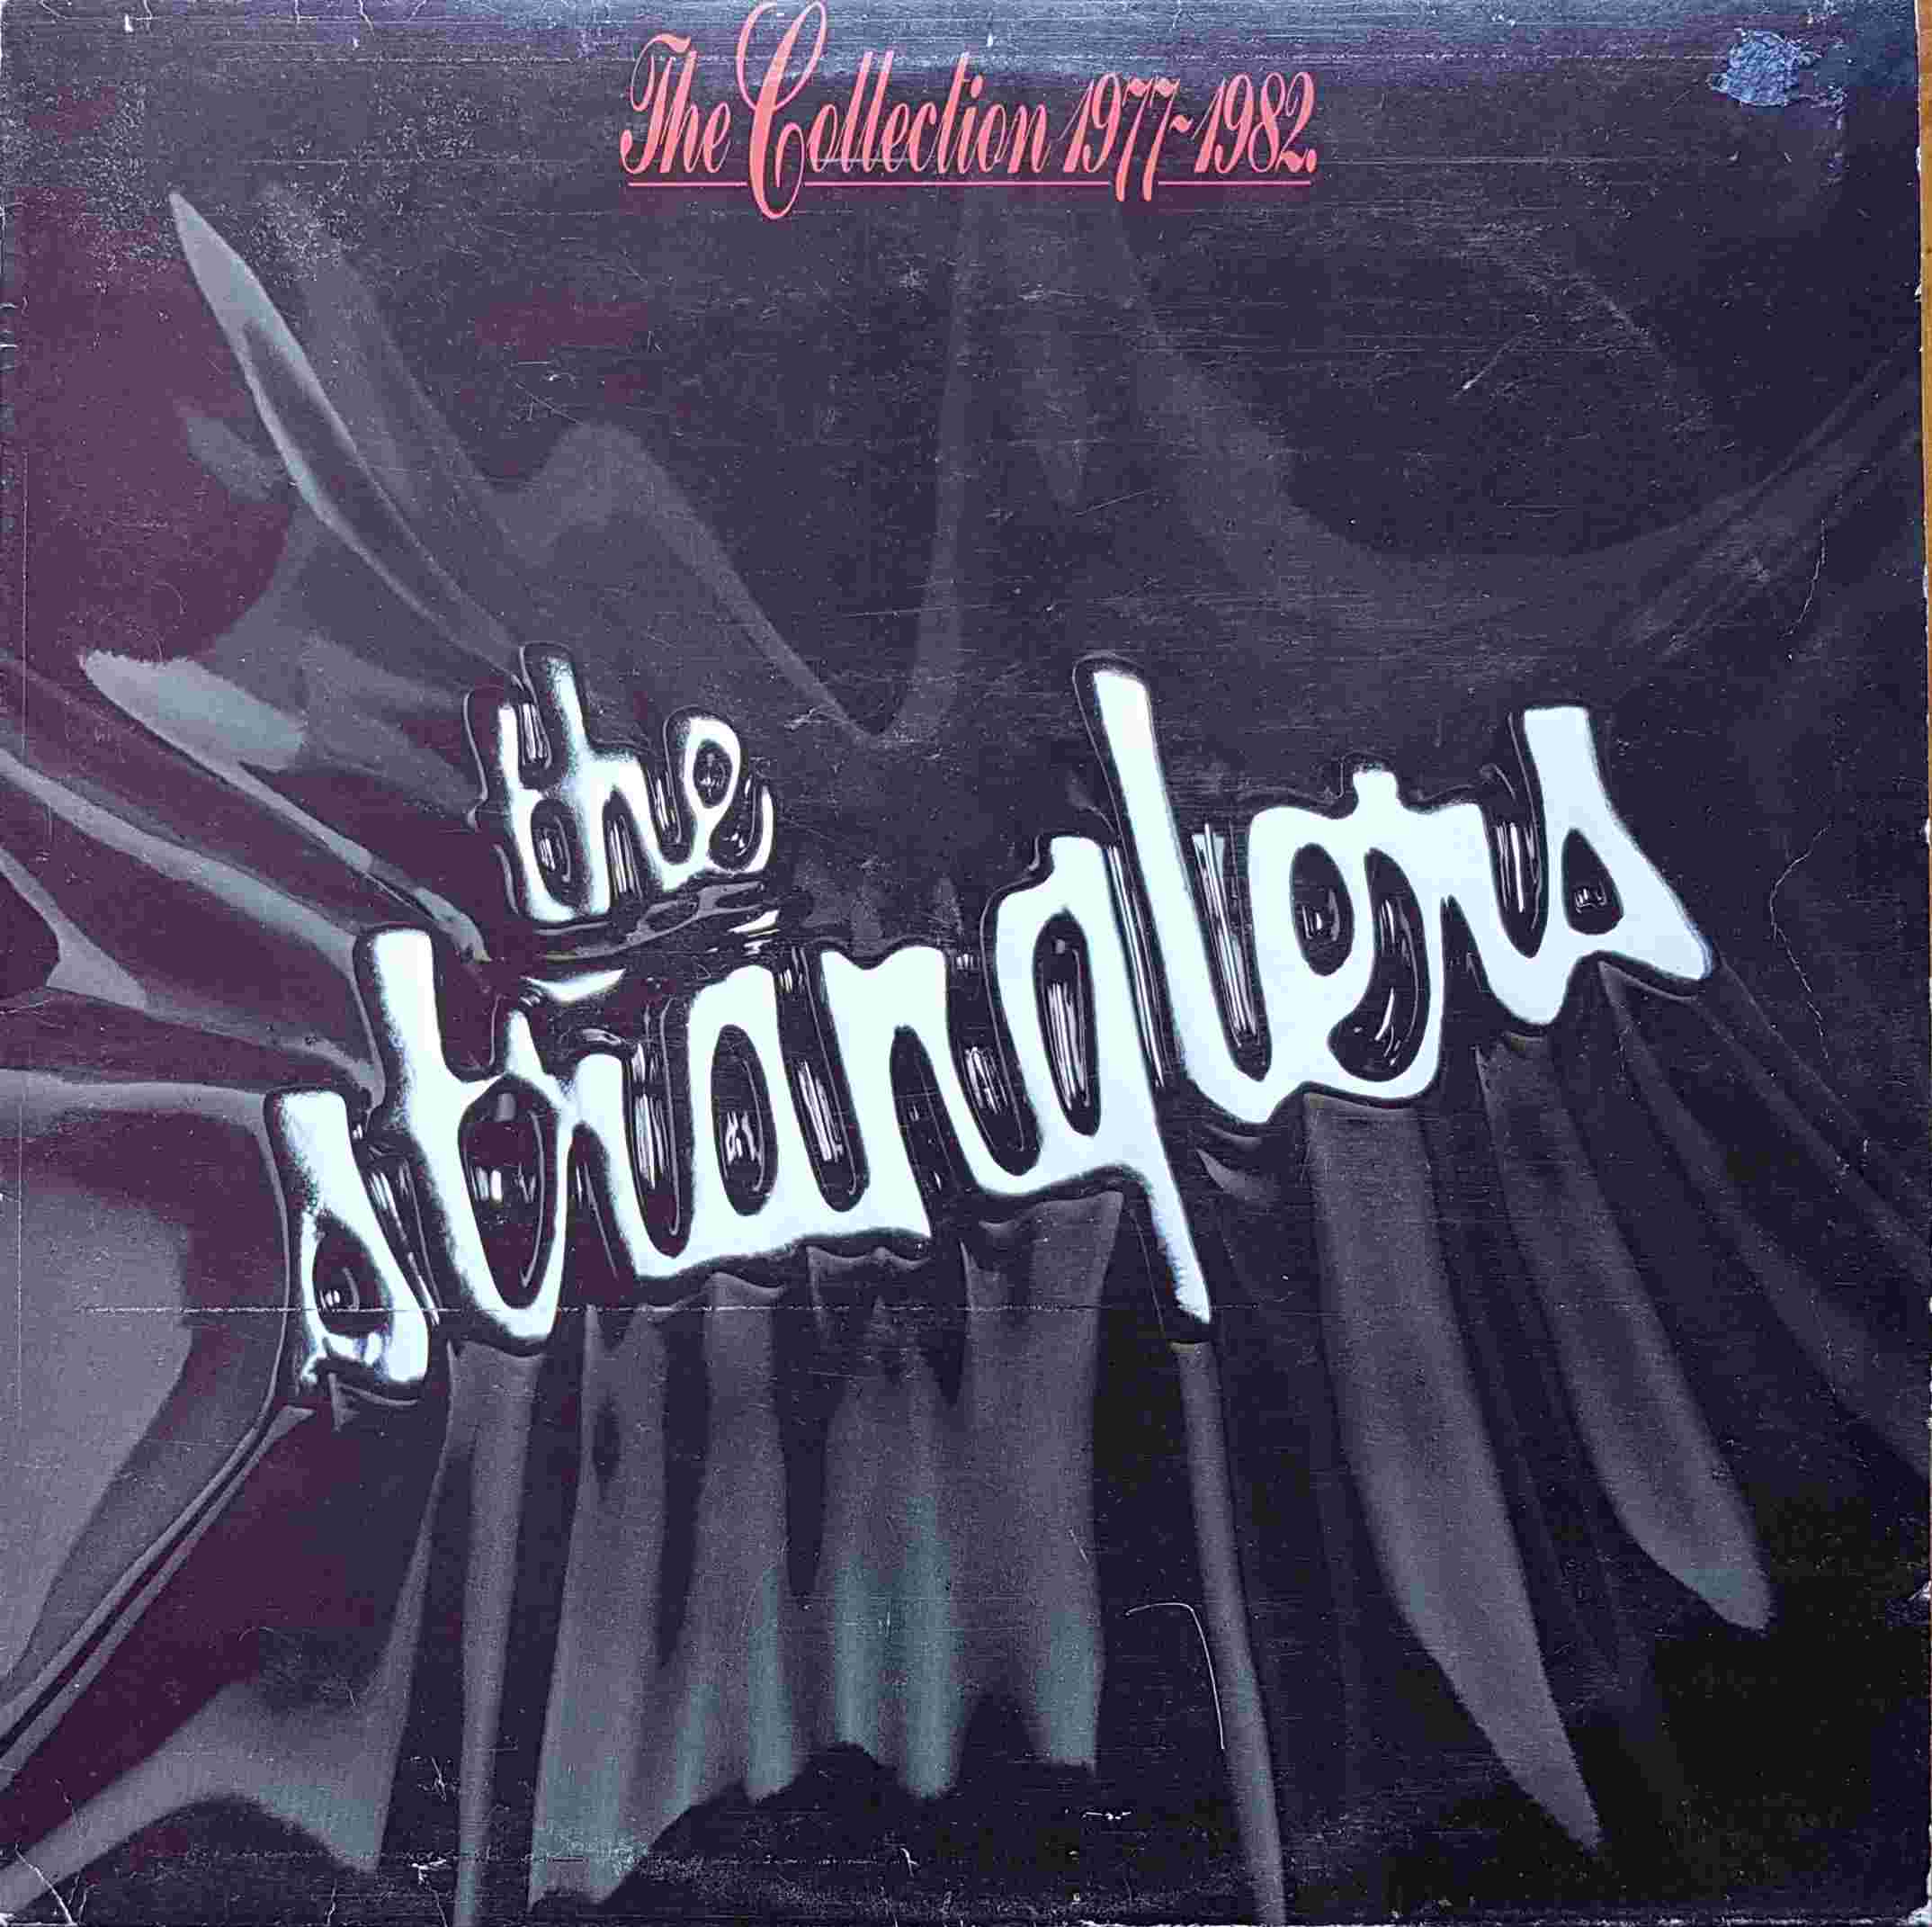 Picture of 14C 062 - 83327 The collection 1977 - 1982 by artist The Stranglers  from The Stranglers